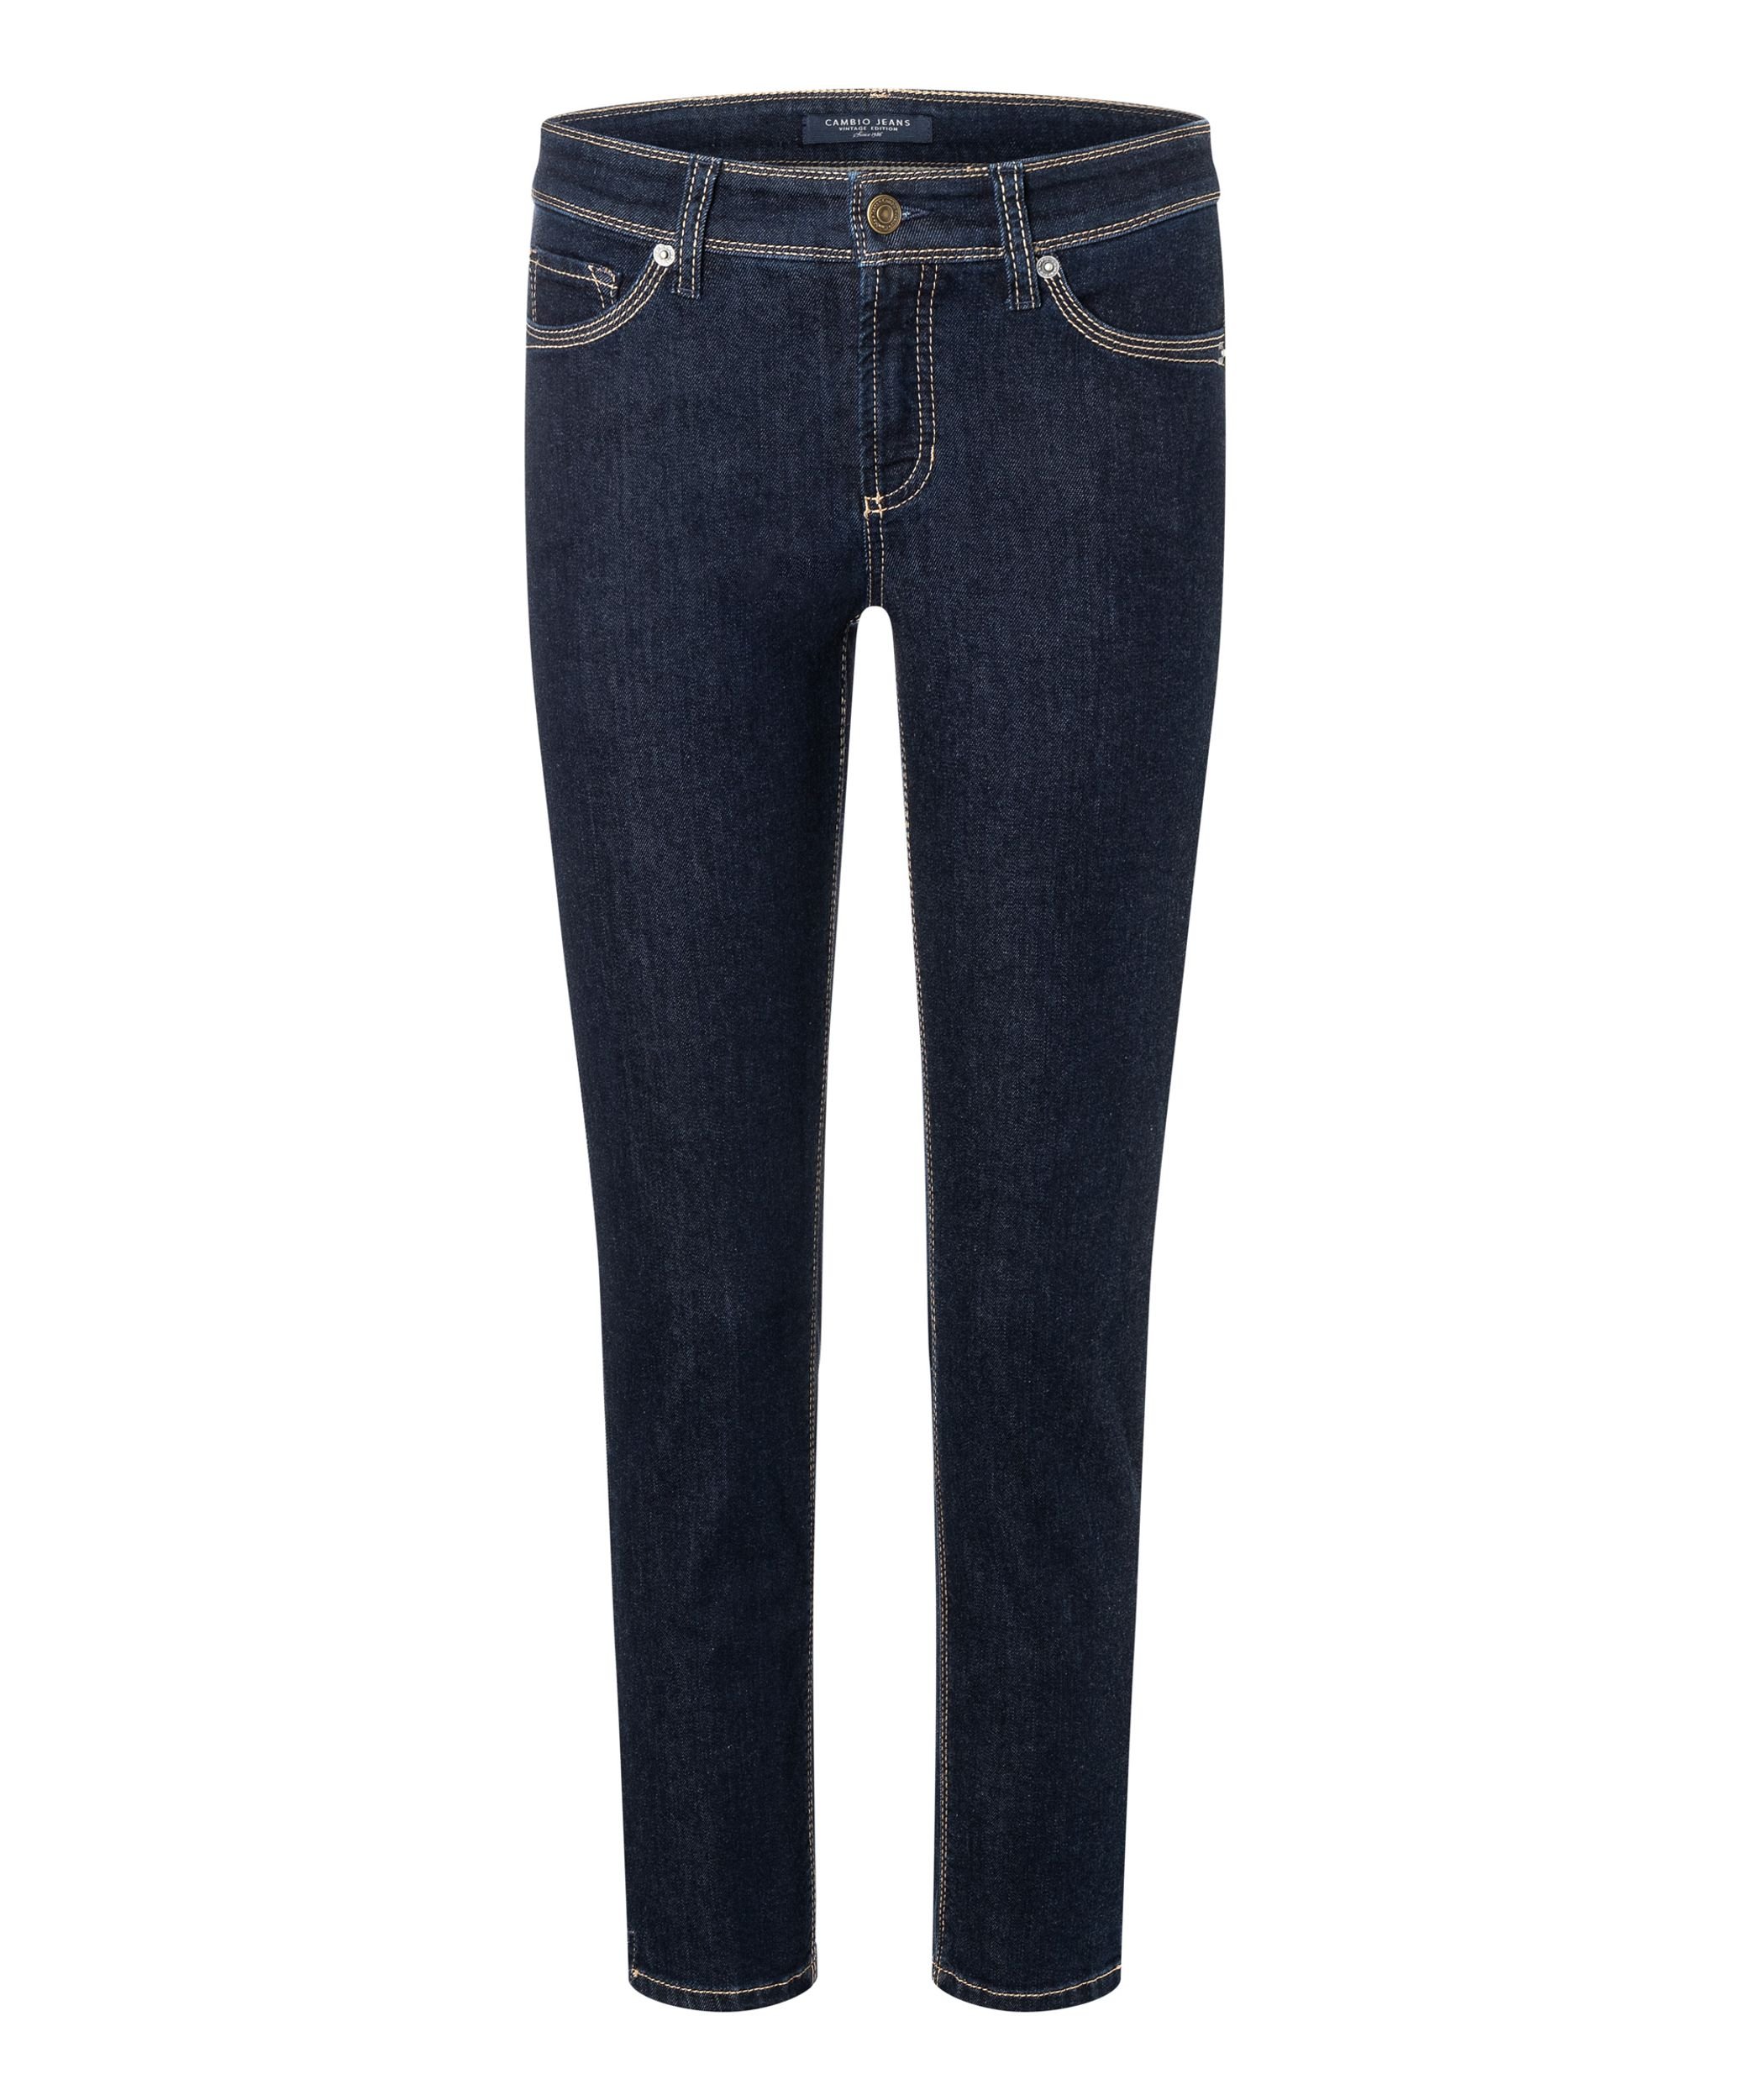 Cambio Skinny Jeans 